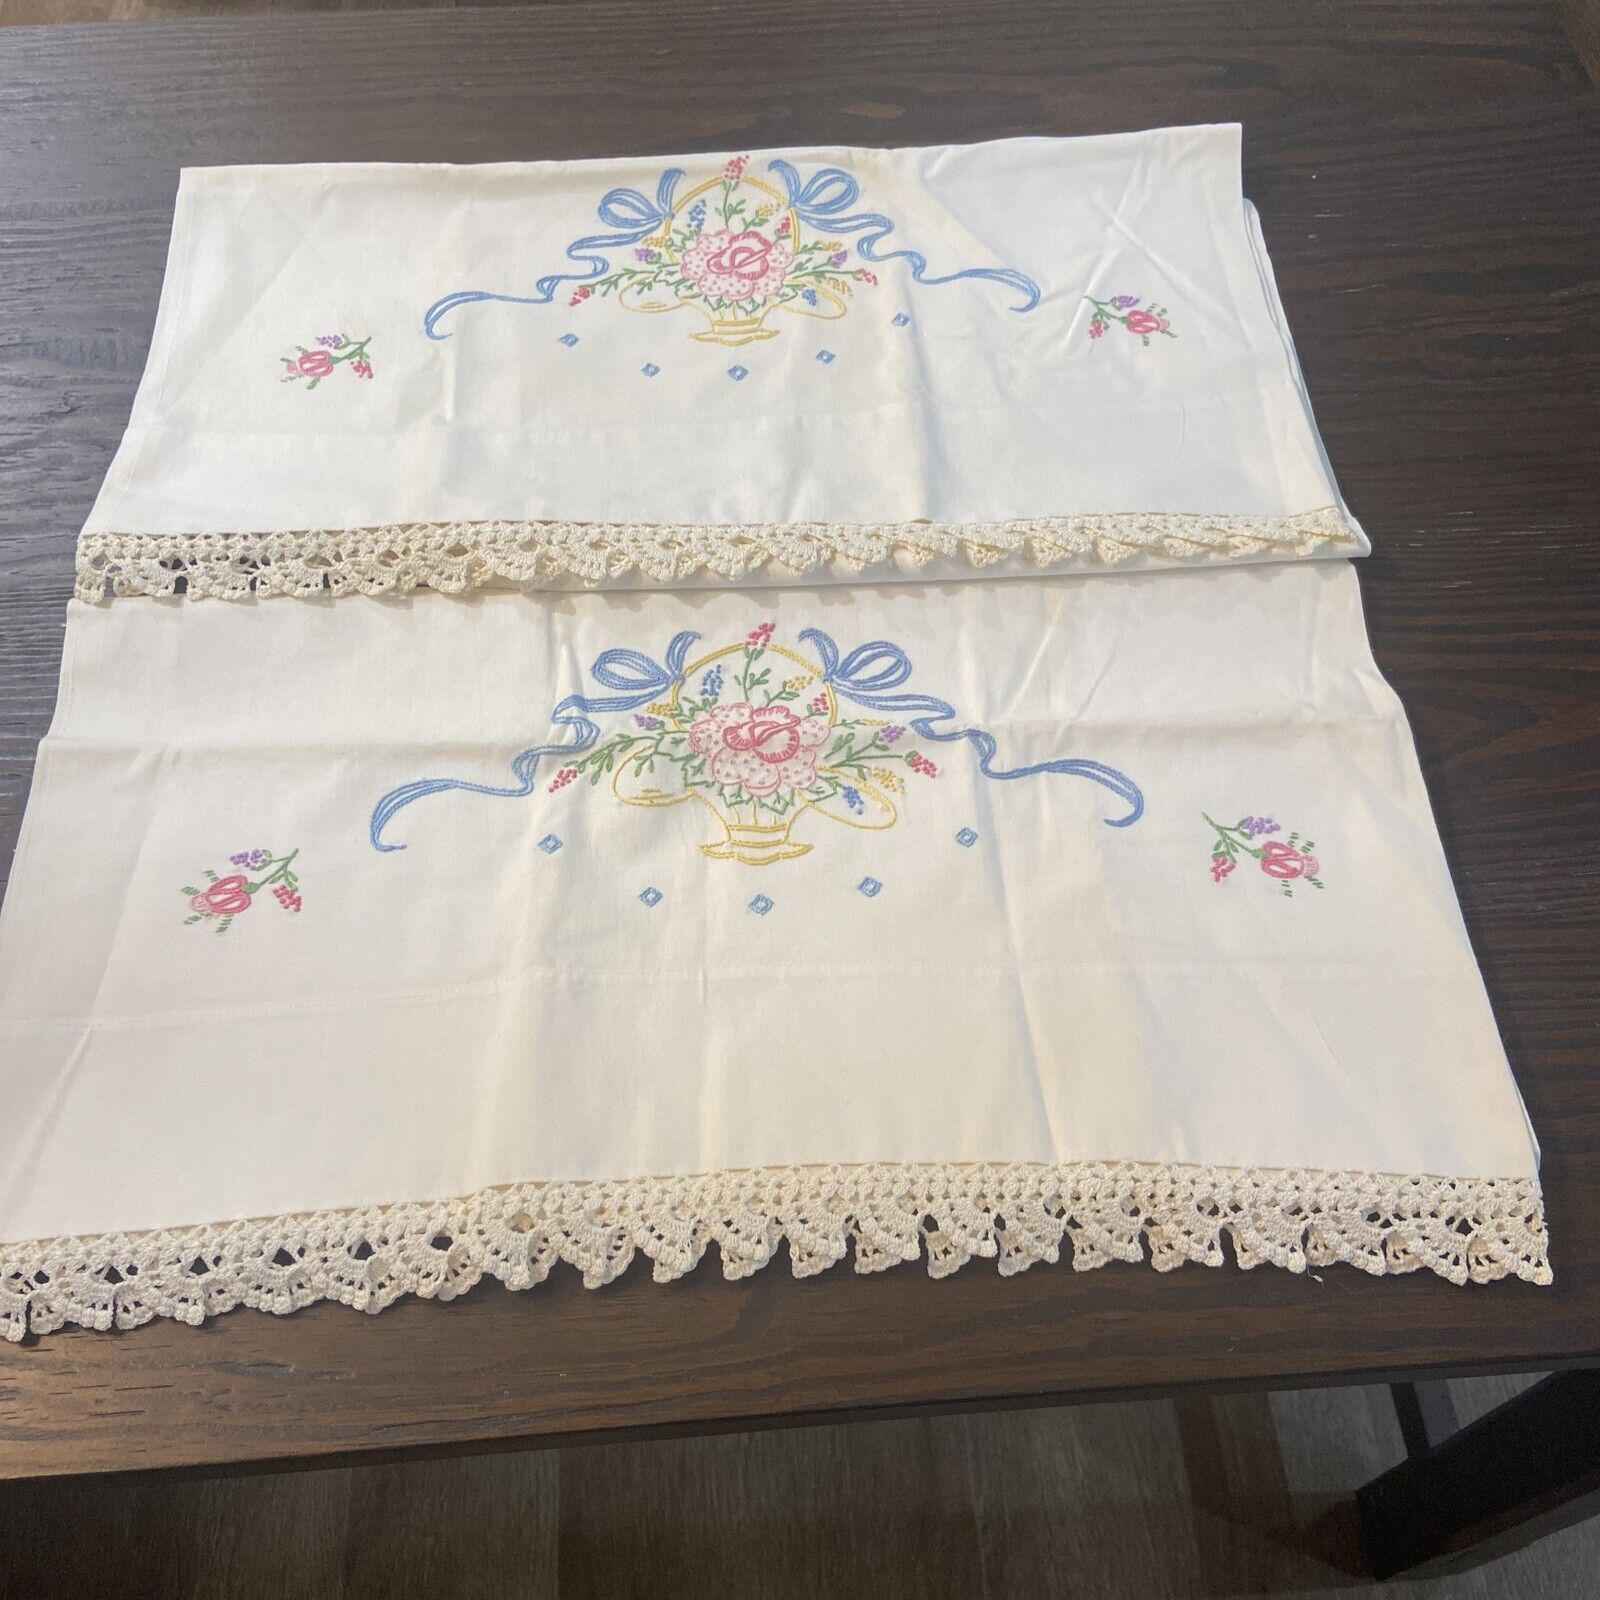 Vintage Hand Embroidered Pillowcases With Flowers And Basket. Pair